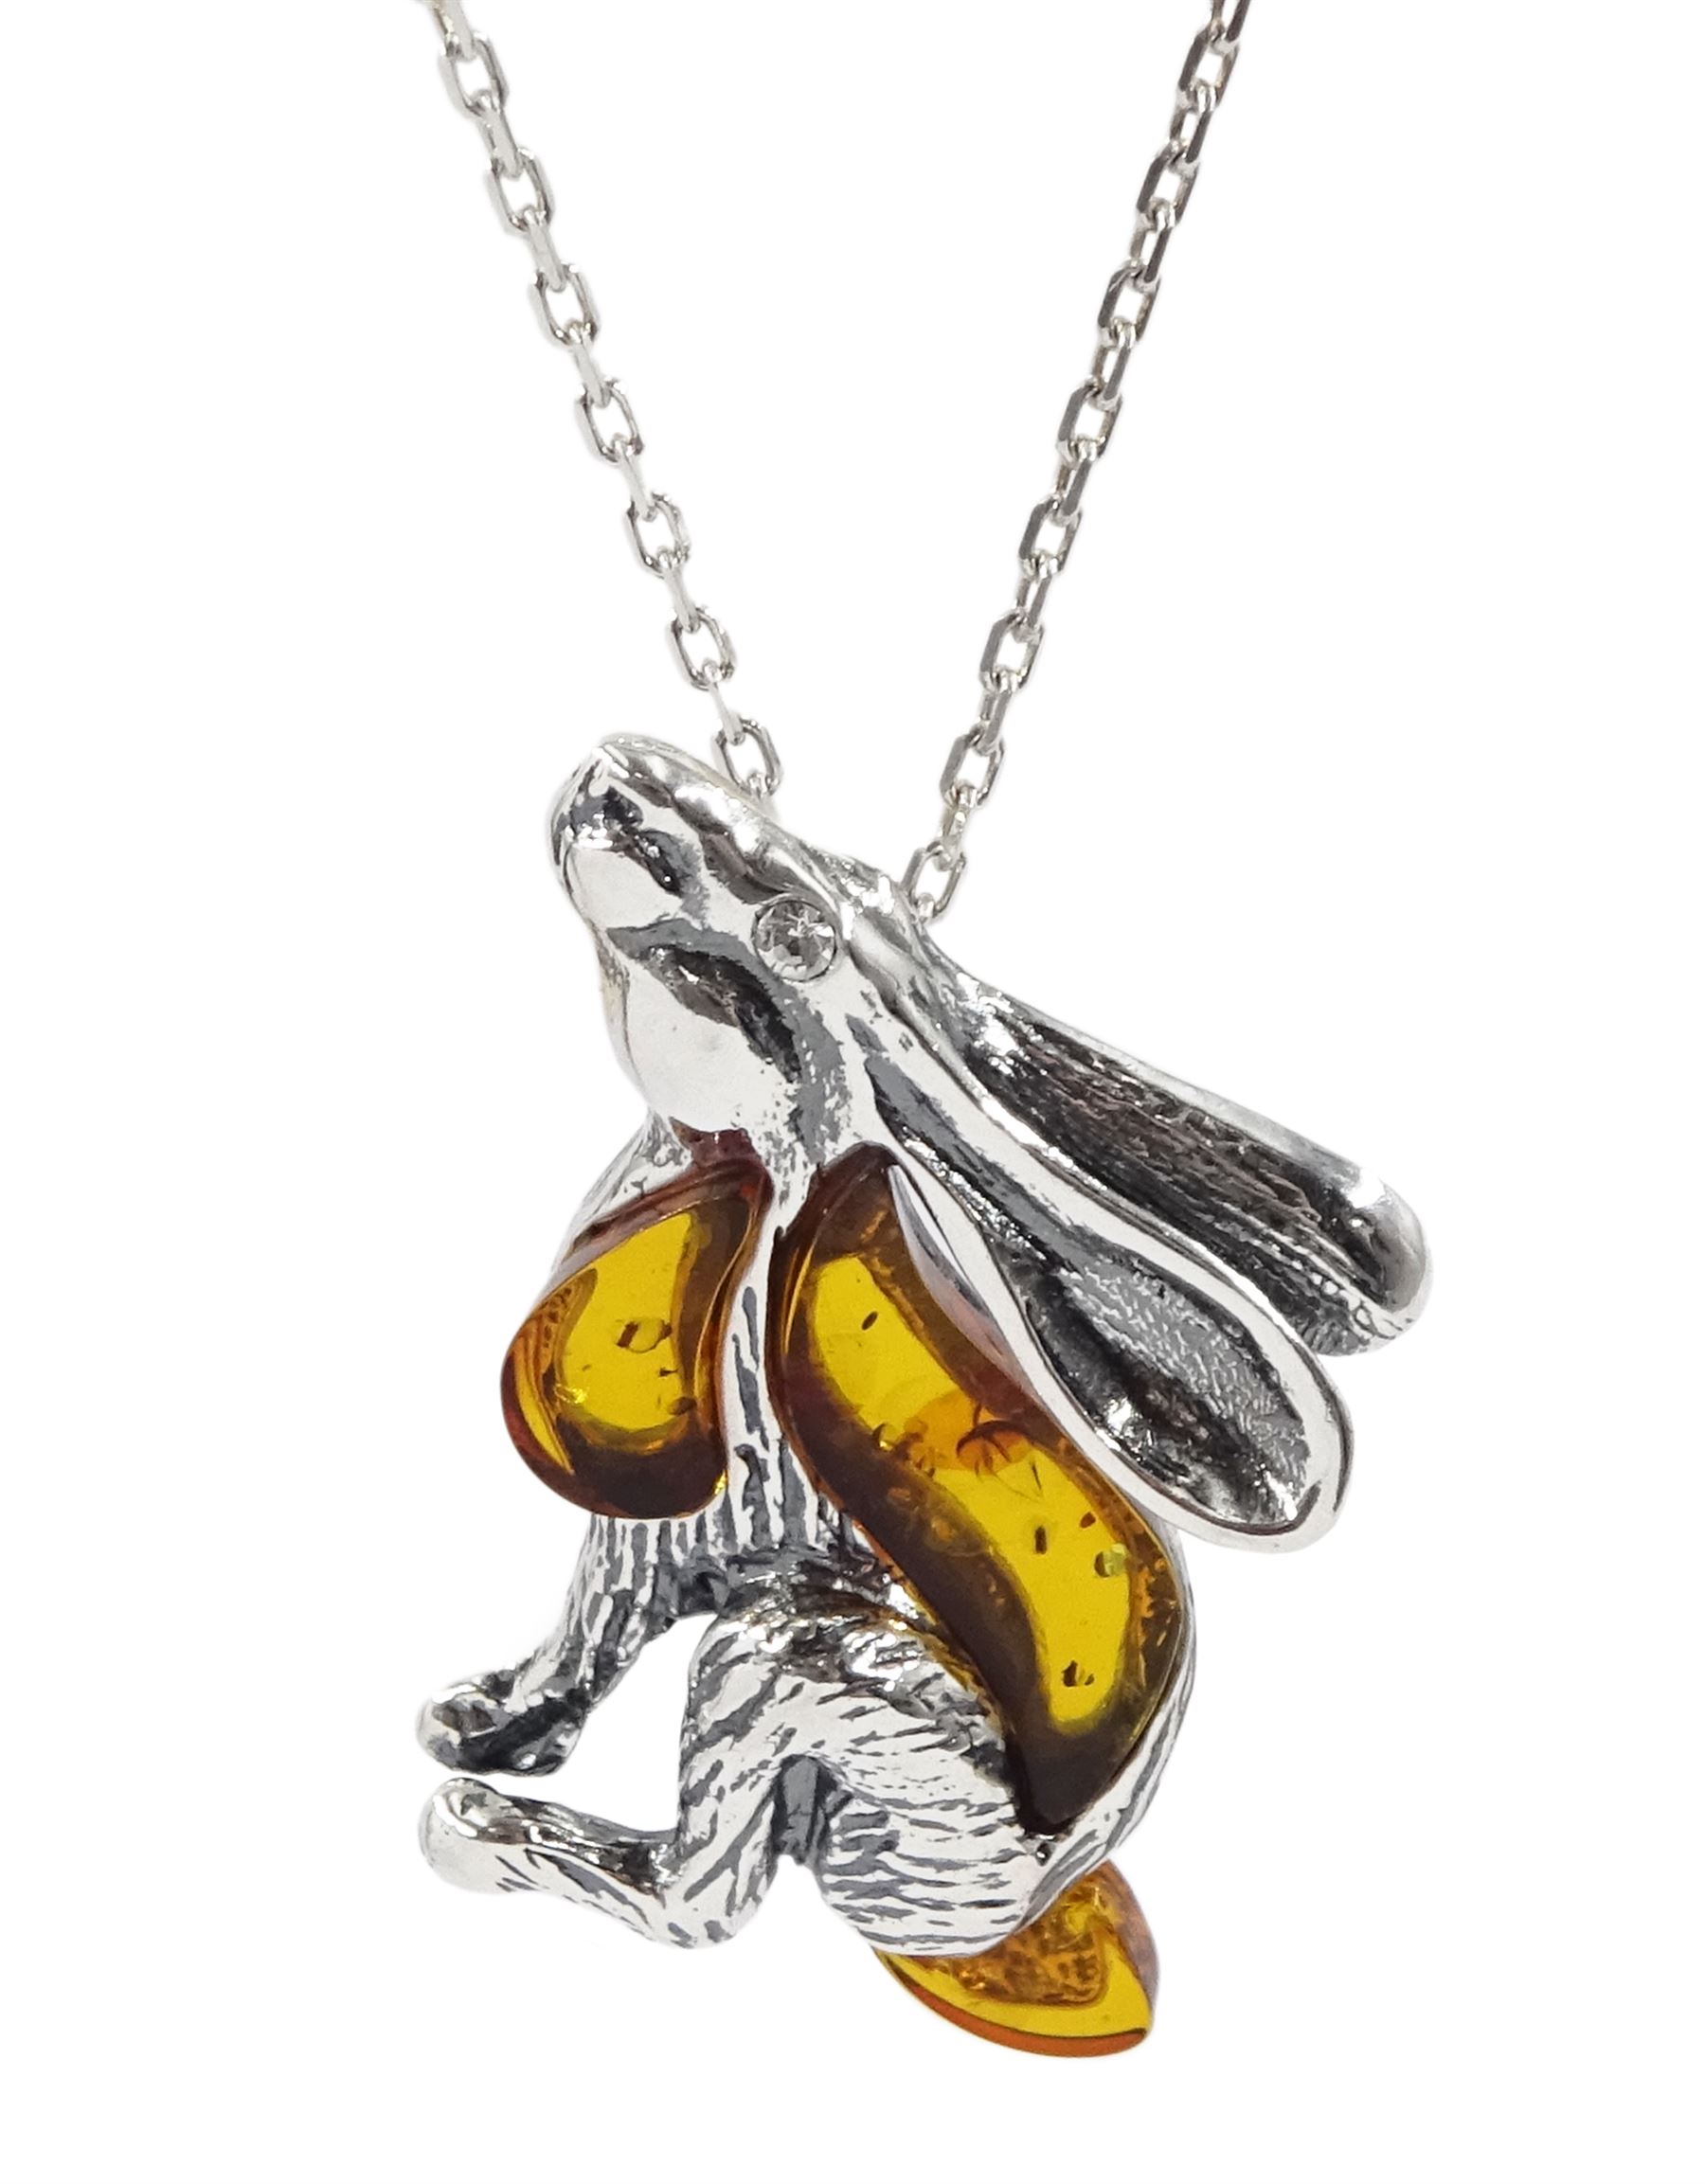 Silver Baltic amber moon gazing hare pendant necklace